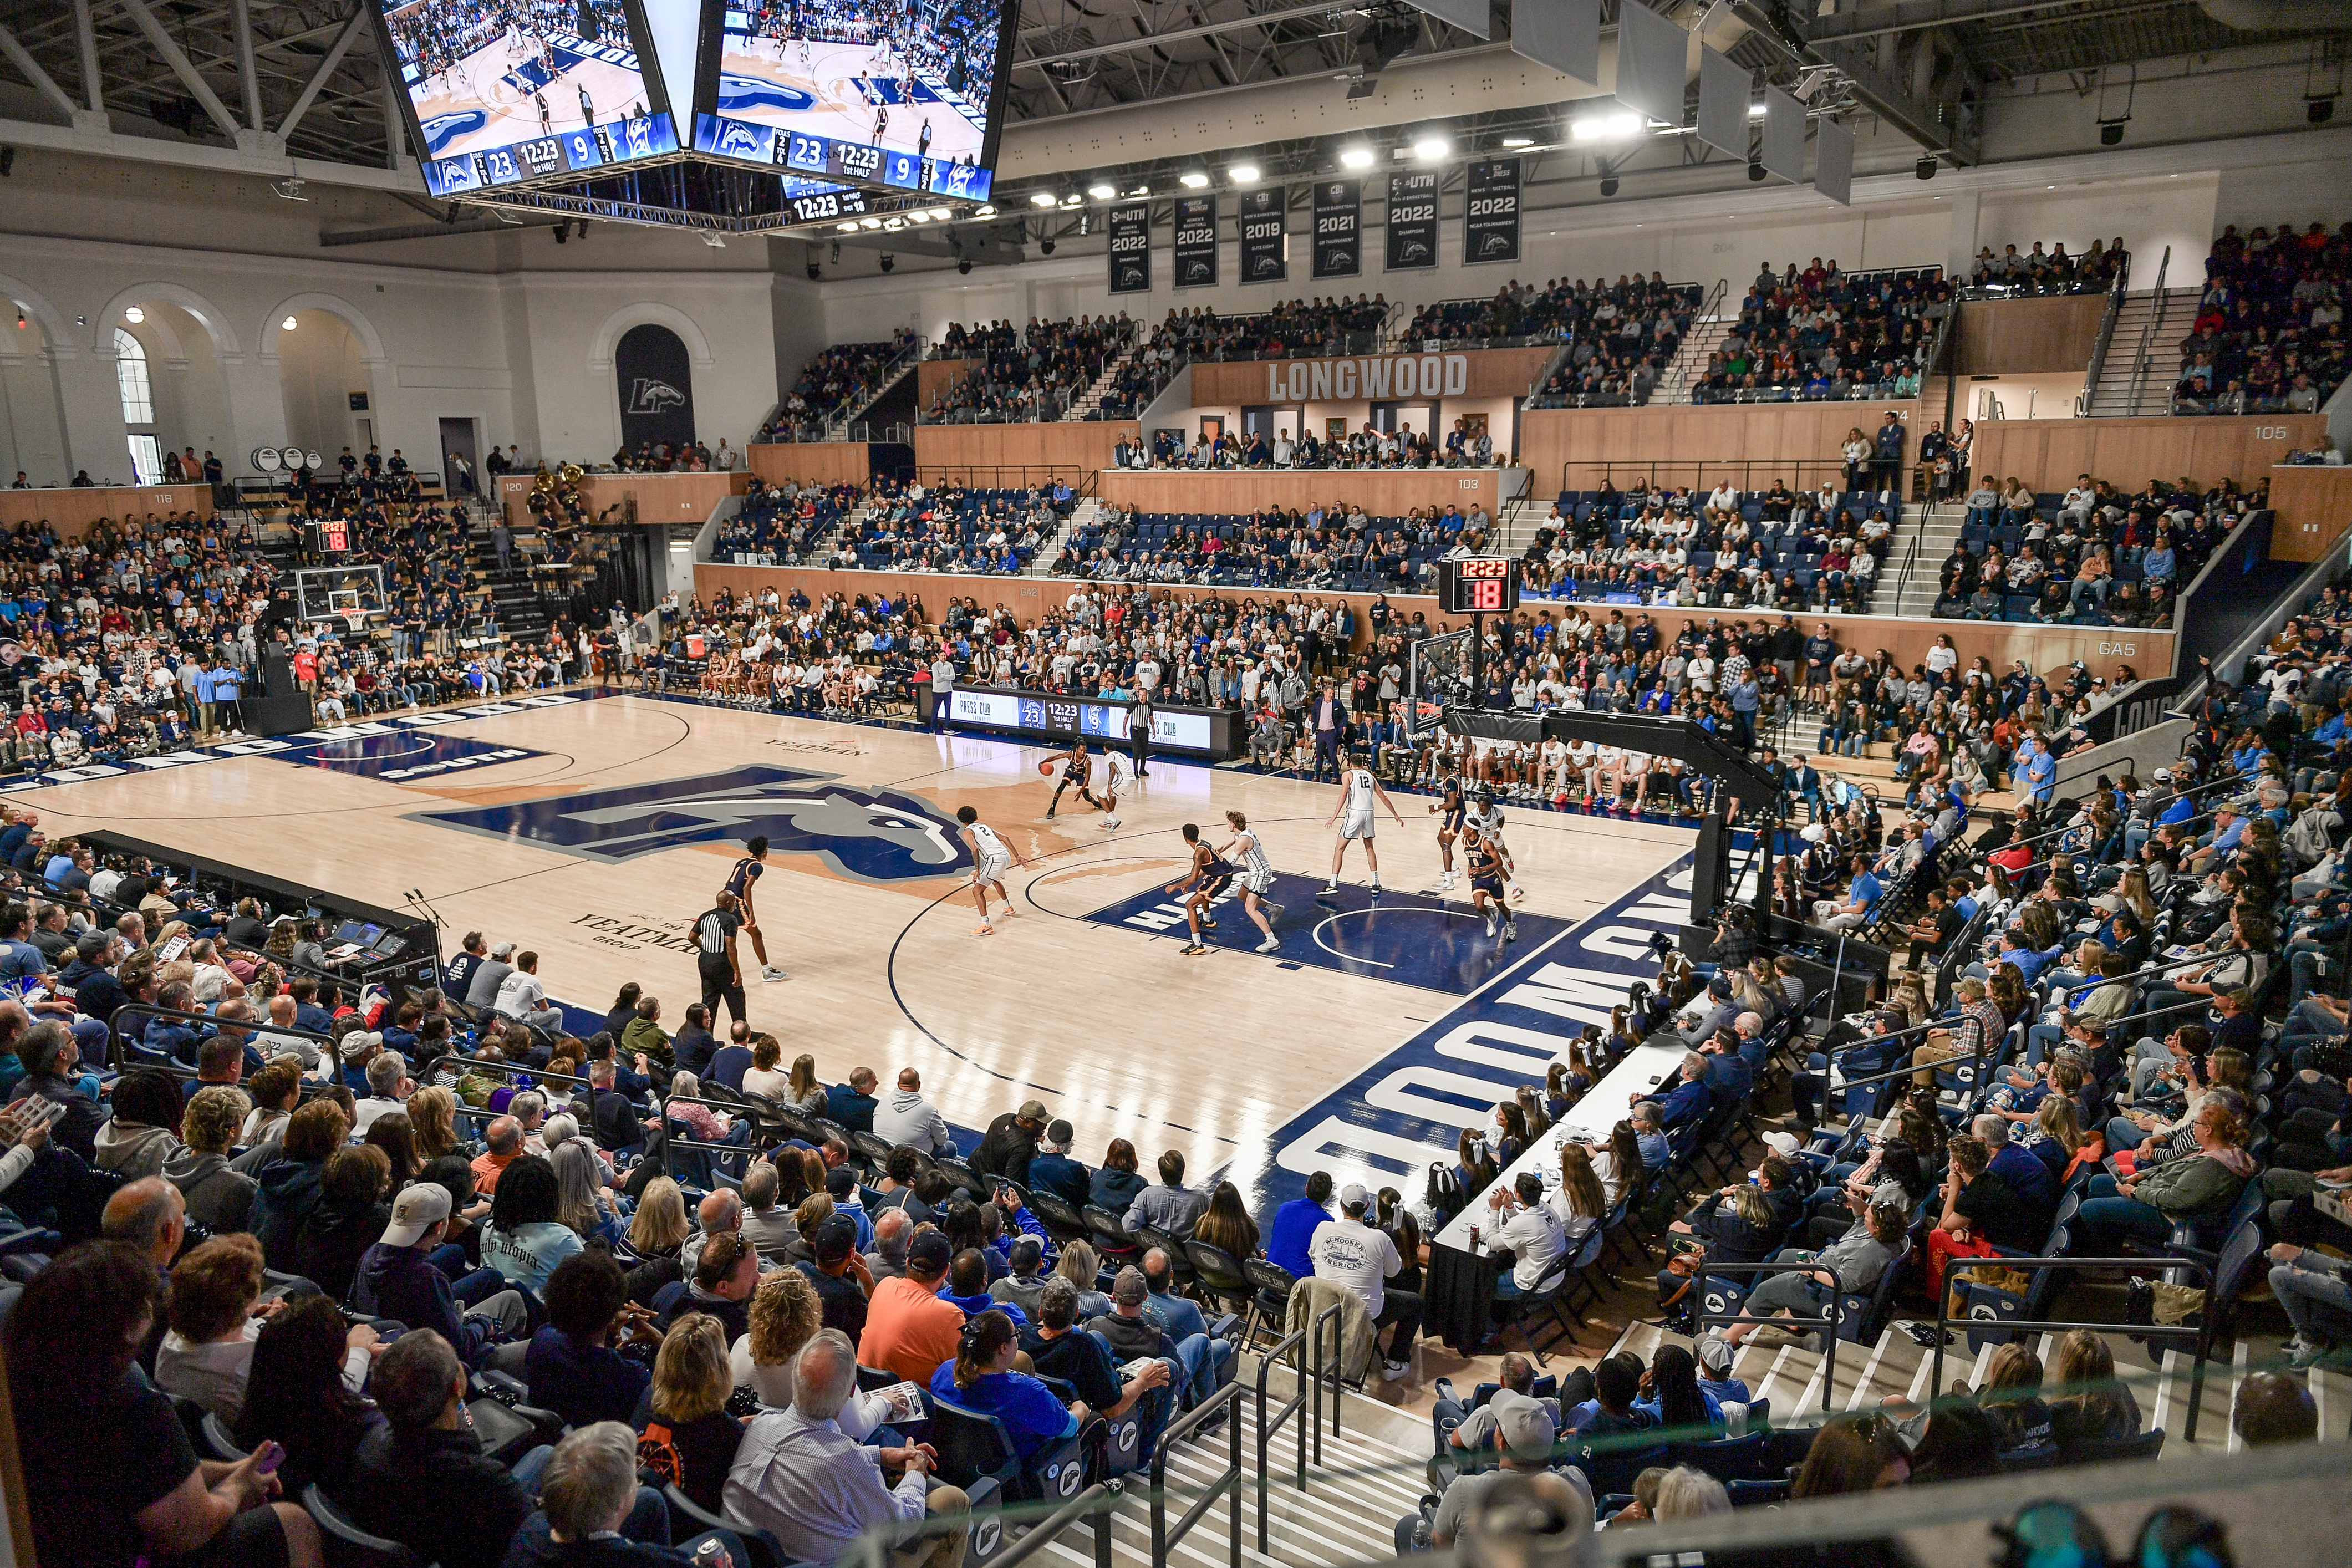 From the celebratory cheers of Convocation to raucous crowd chants at a sold-out Division I playoff basketball game, the spirit of Longwood reverberates in the Joan Perry Brock Center.